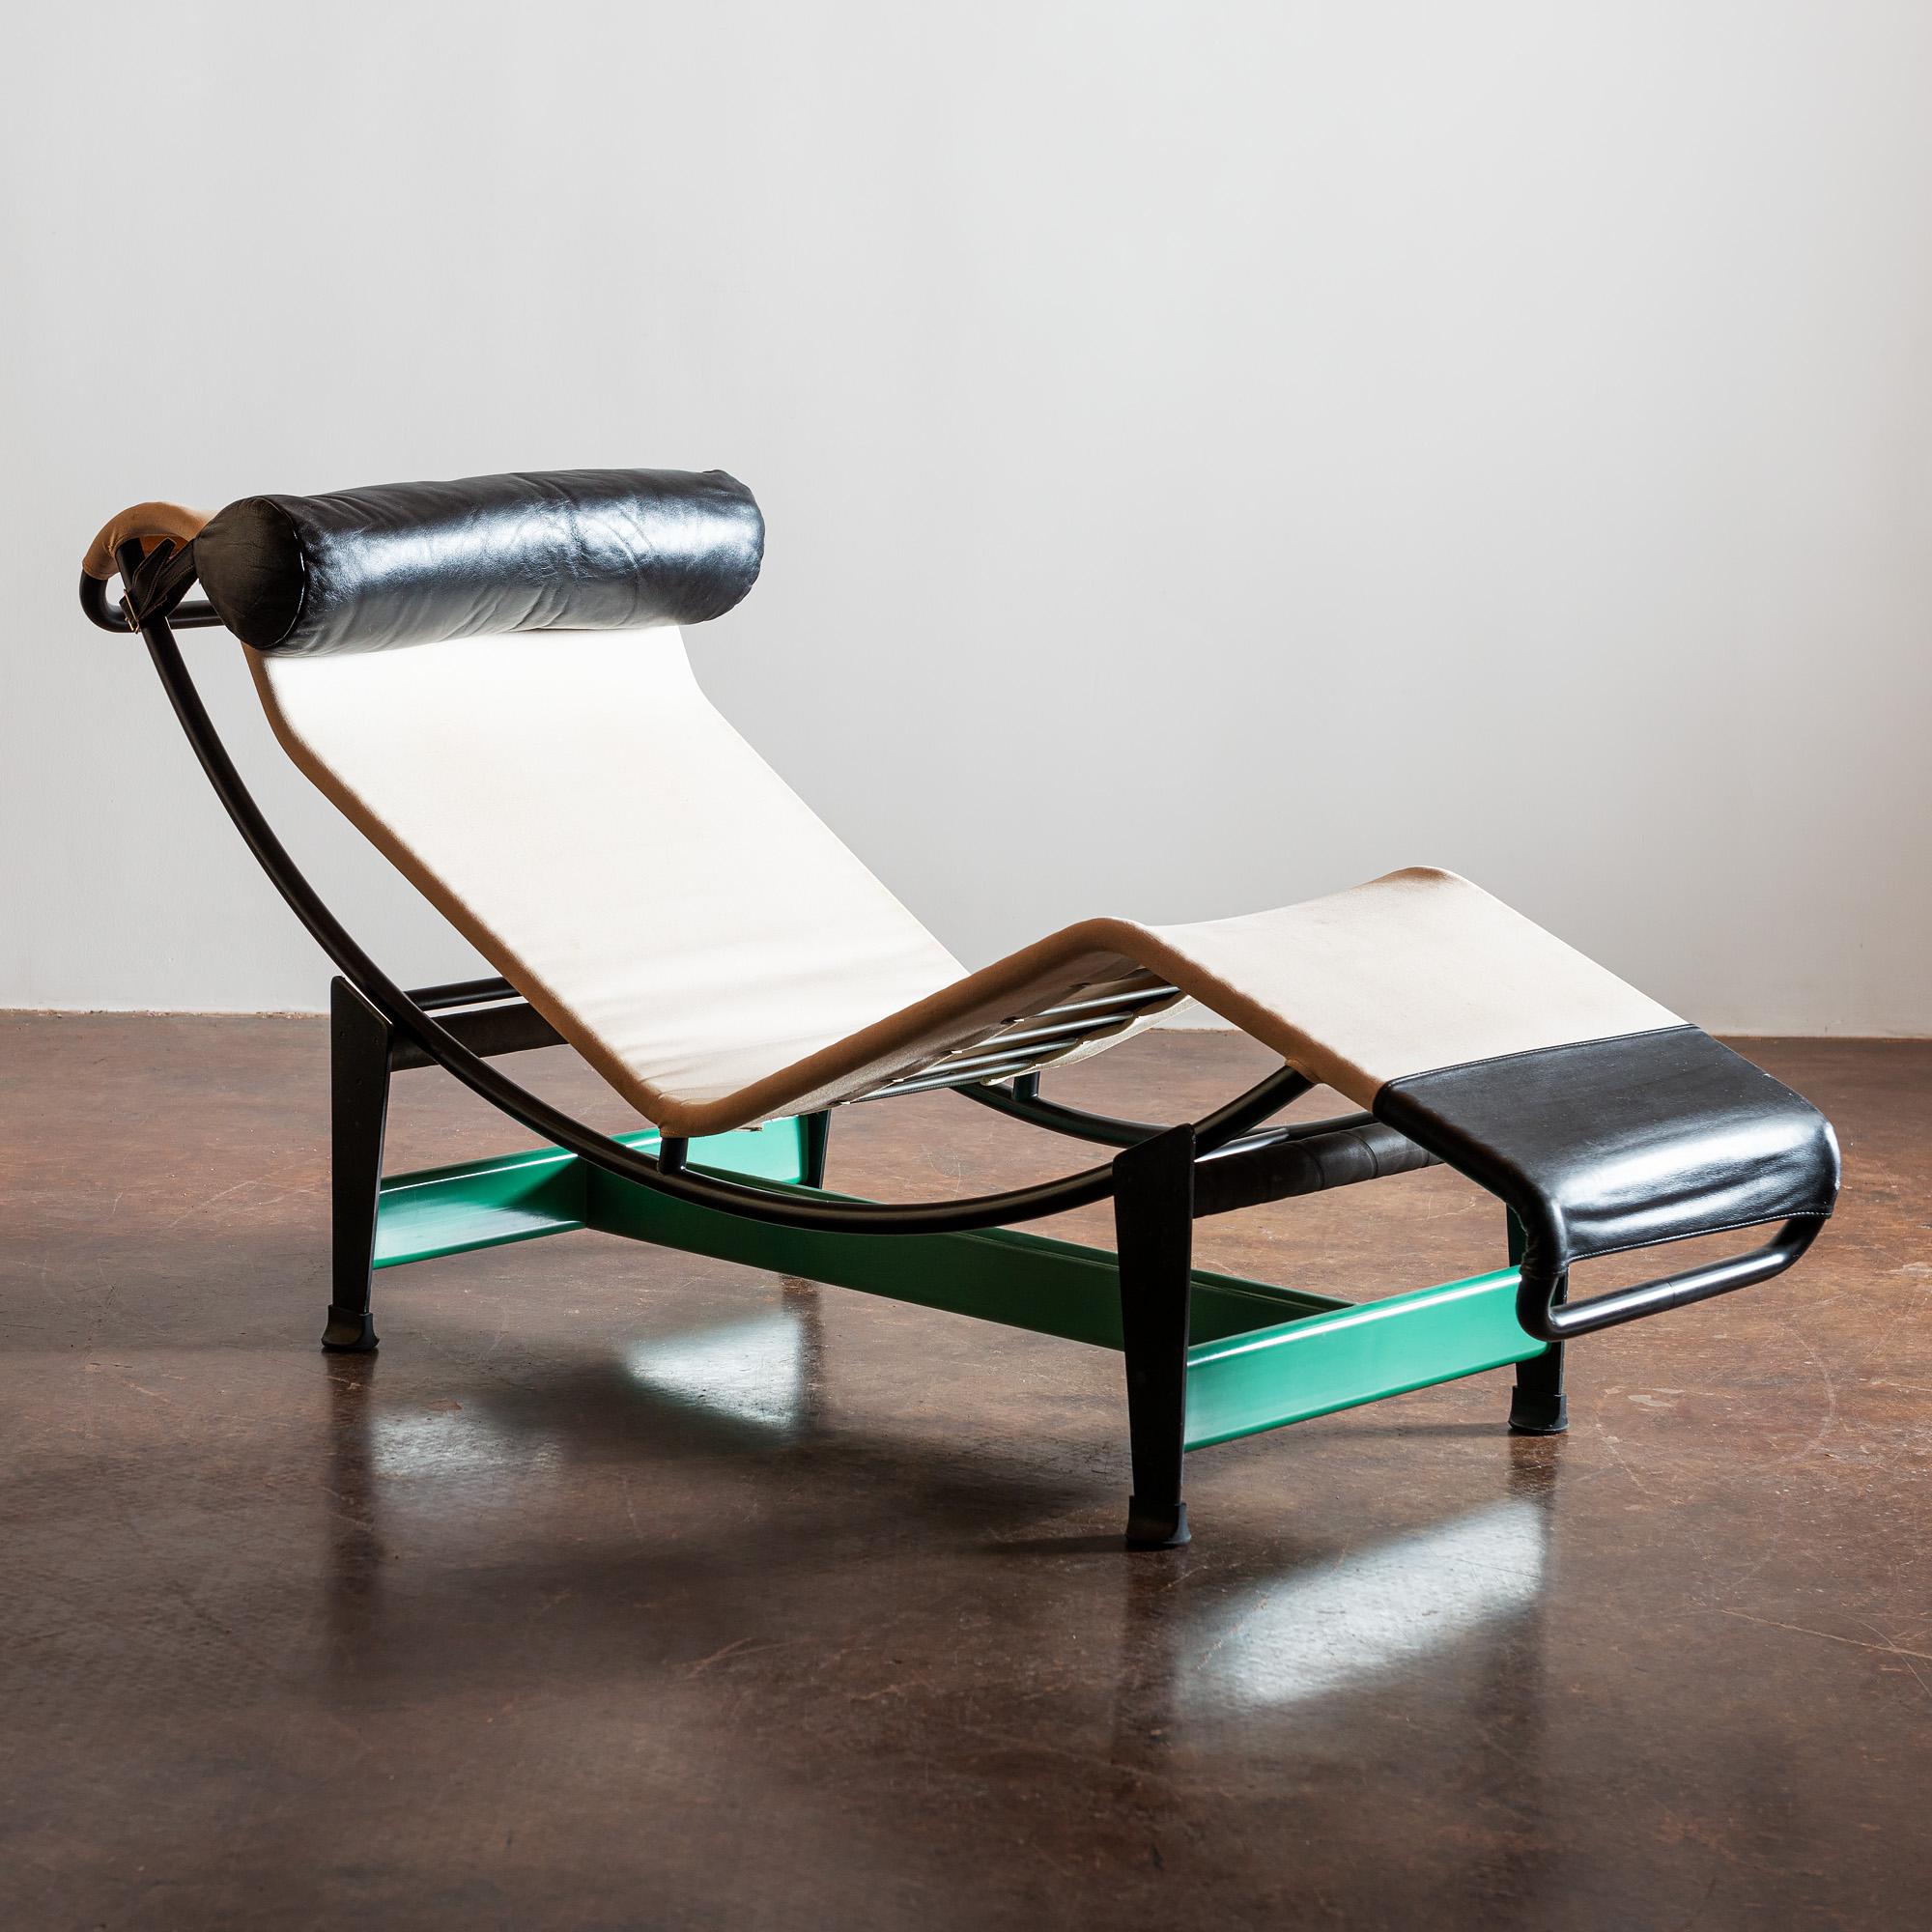 A stylish re-edition of the iconic LC4 by Cassina with green base. This example produced in 1980 is stamped 